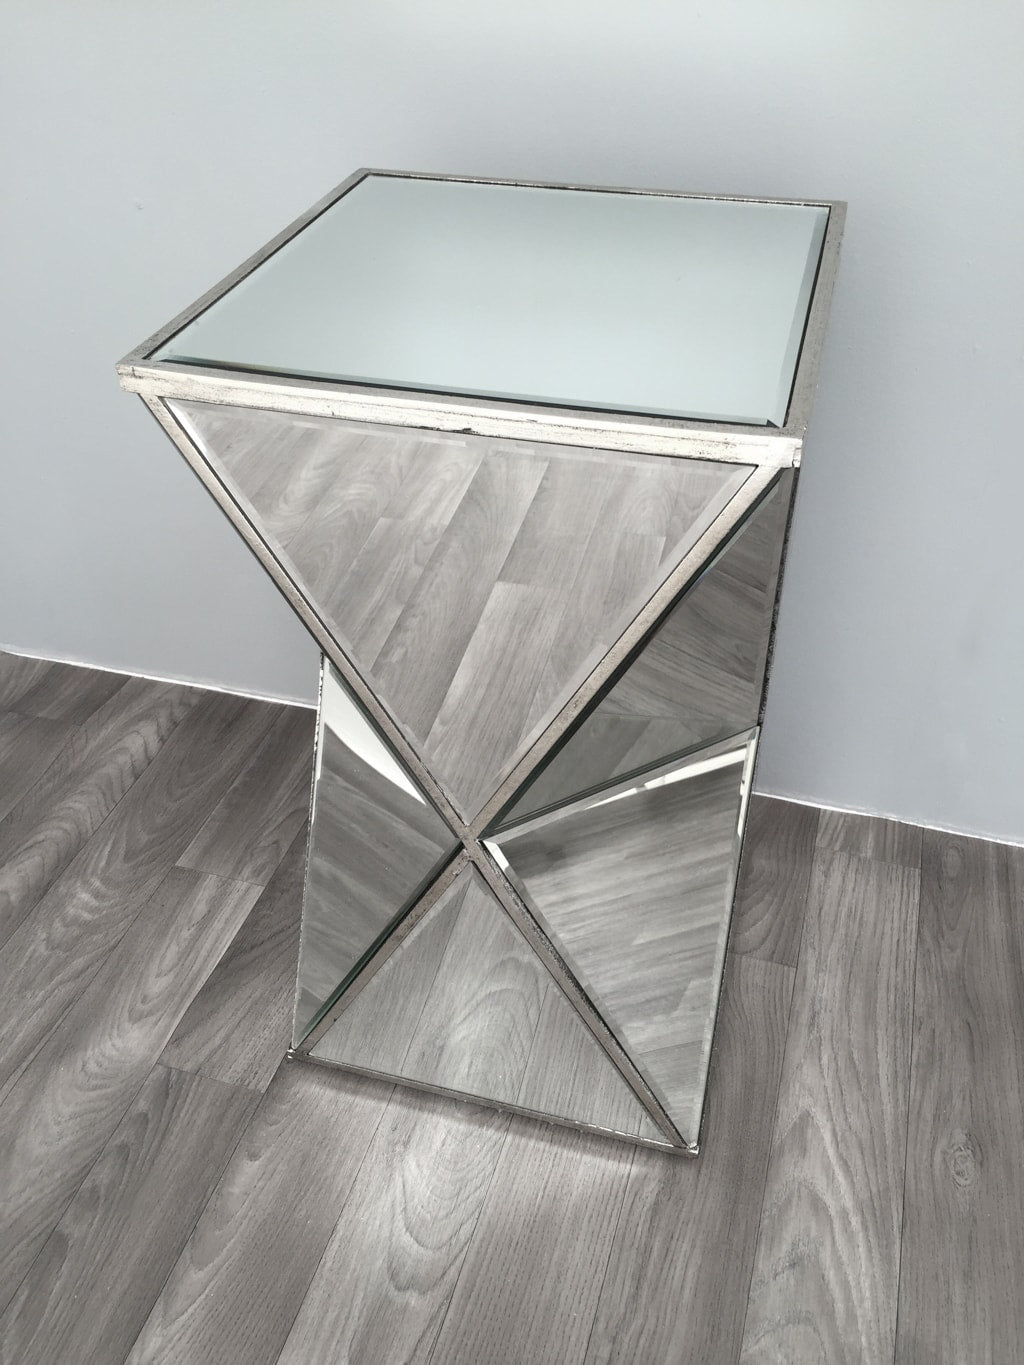 Mirrored Side Table in Hourglass Shape with Triangle Glass panels from Charleston Collection